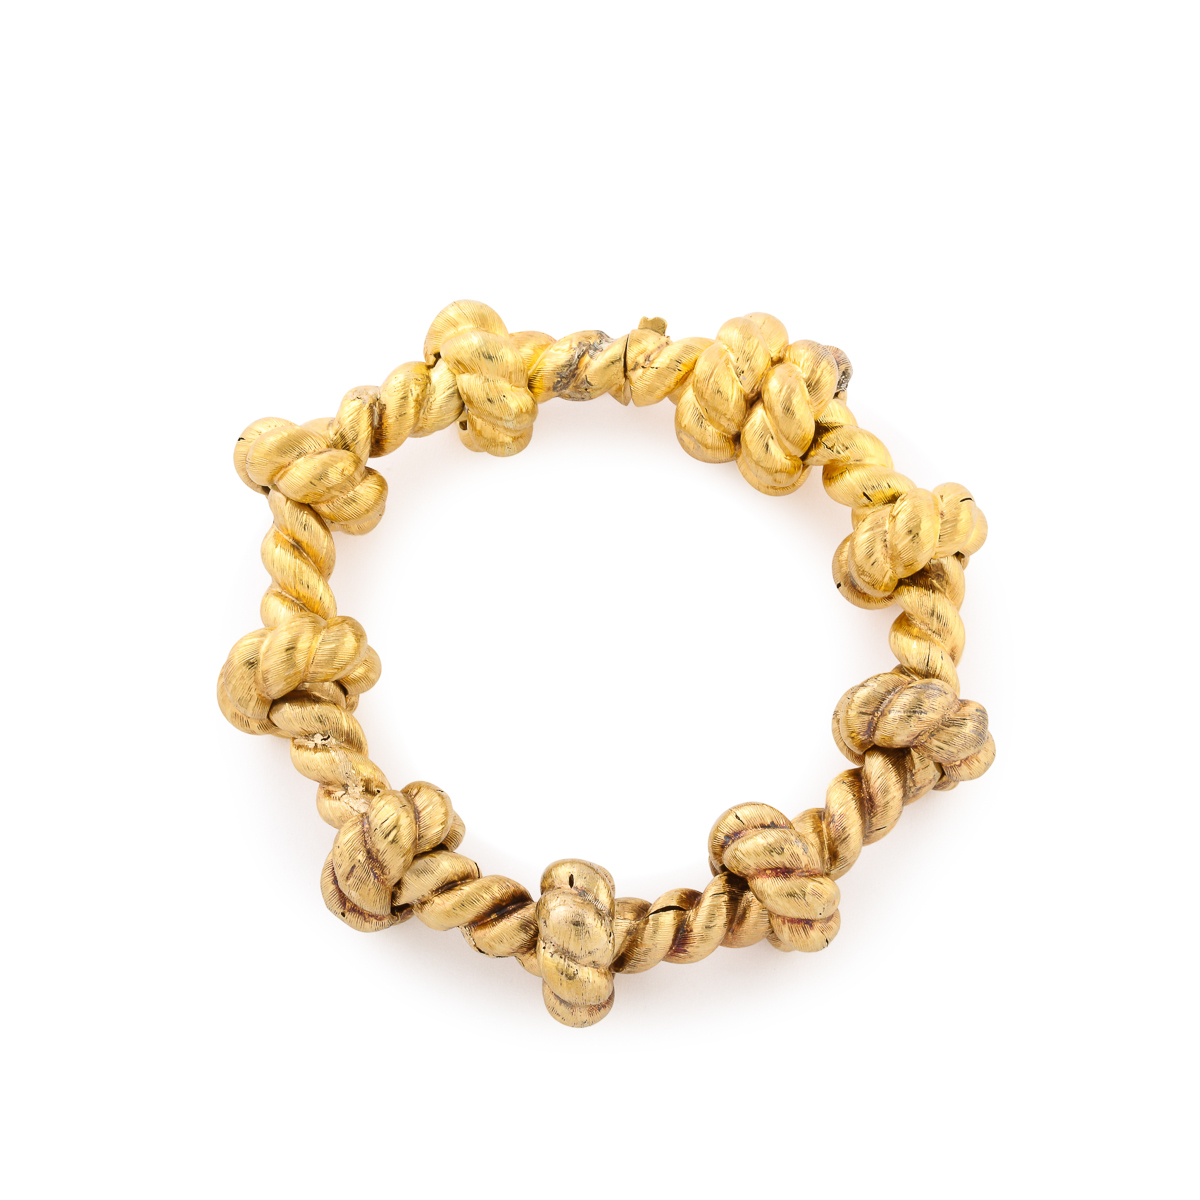 18k gold bracelet designed to look like knotted rope, top view